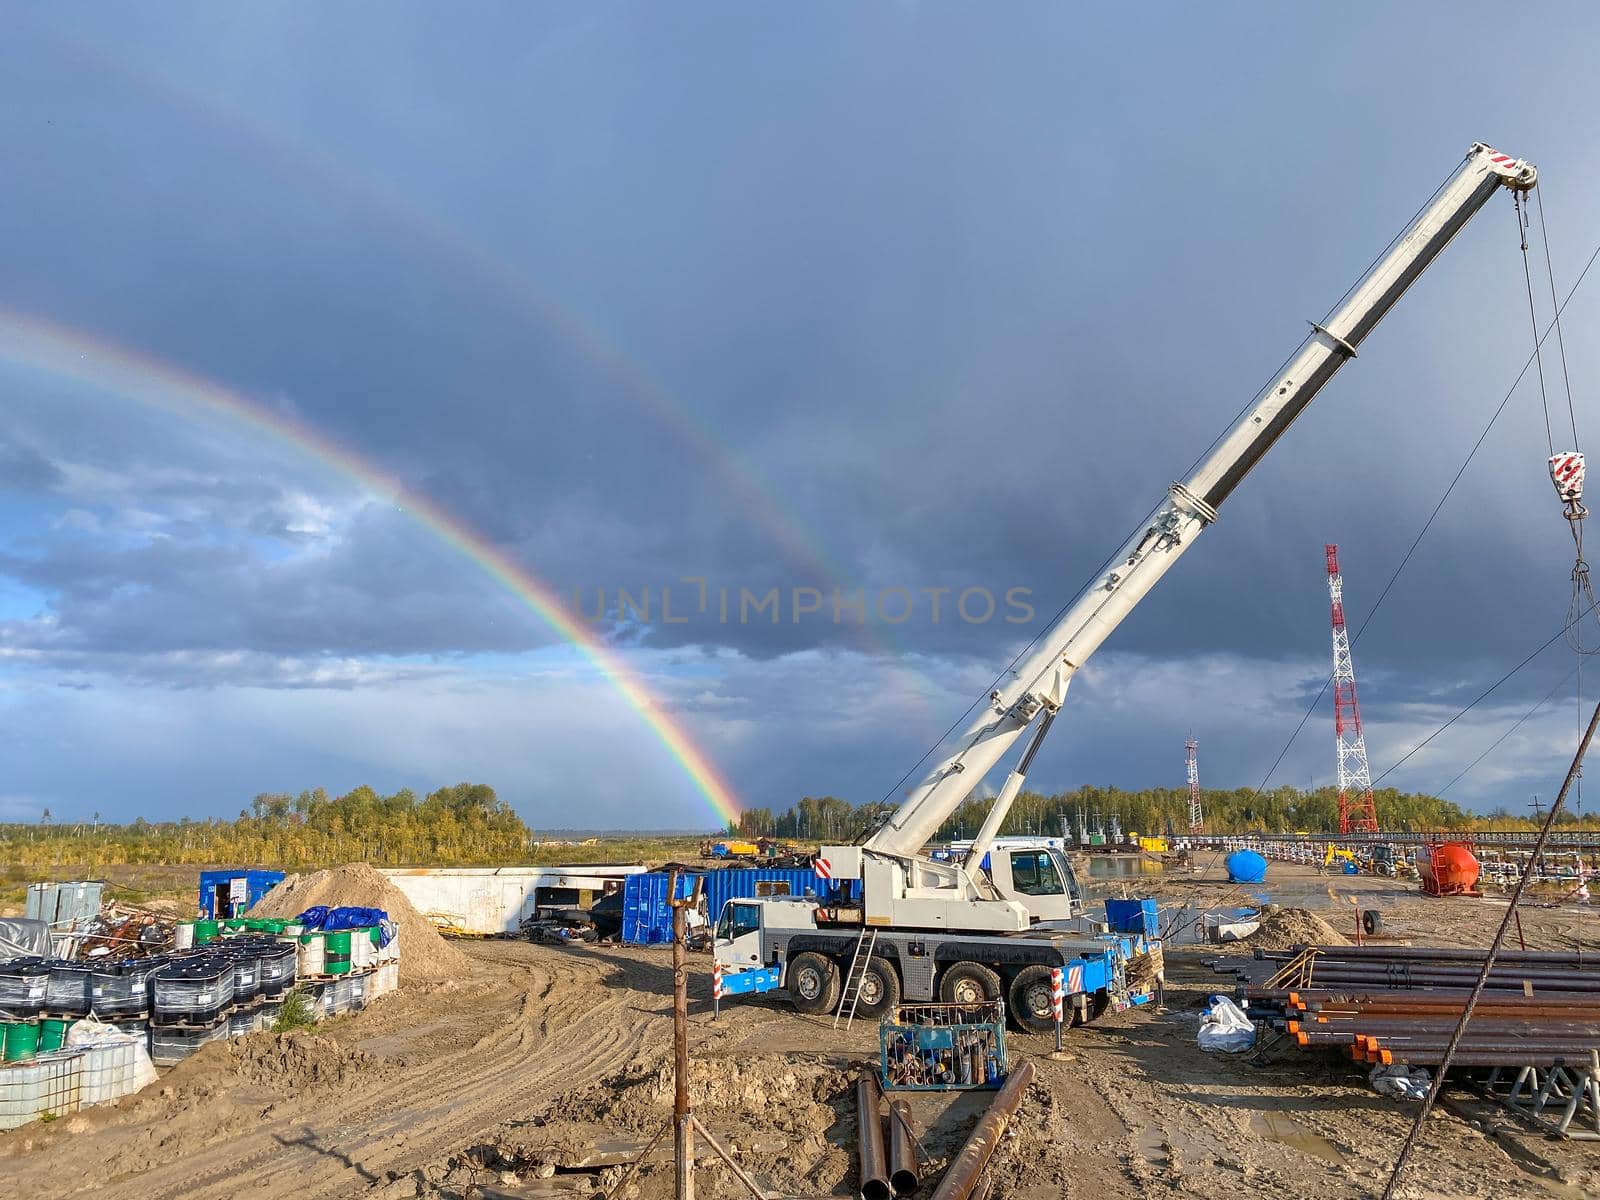 Oil field in the north, rainbow in the background. Working machines on the rig installation by levnat09